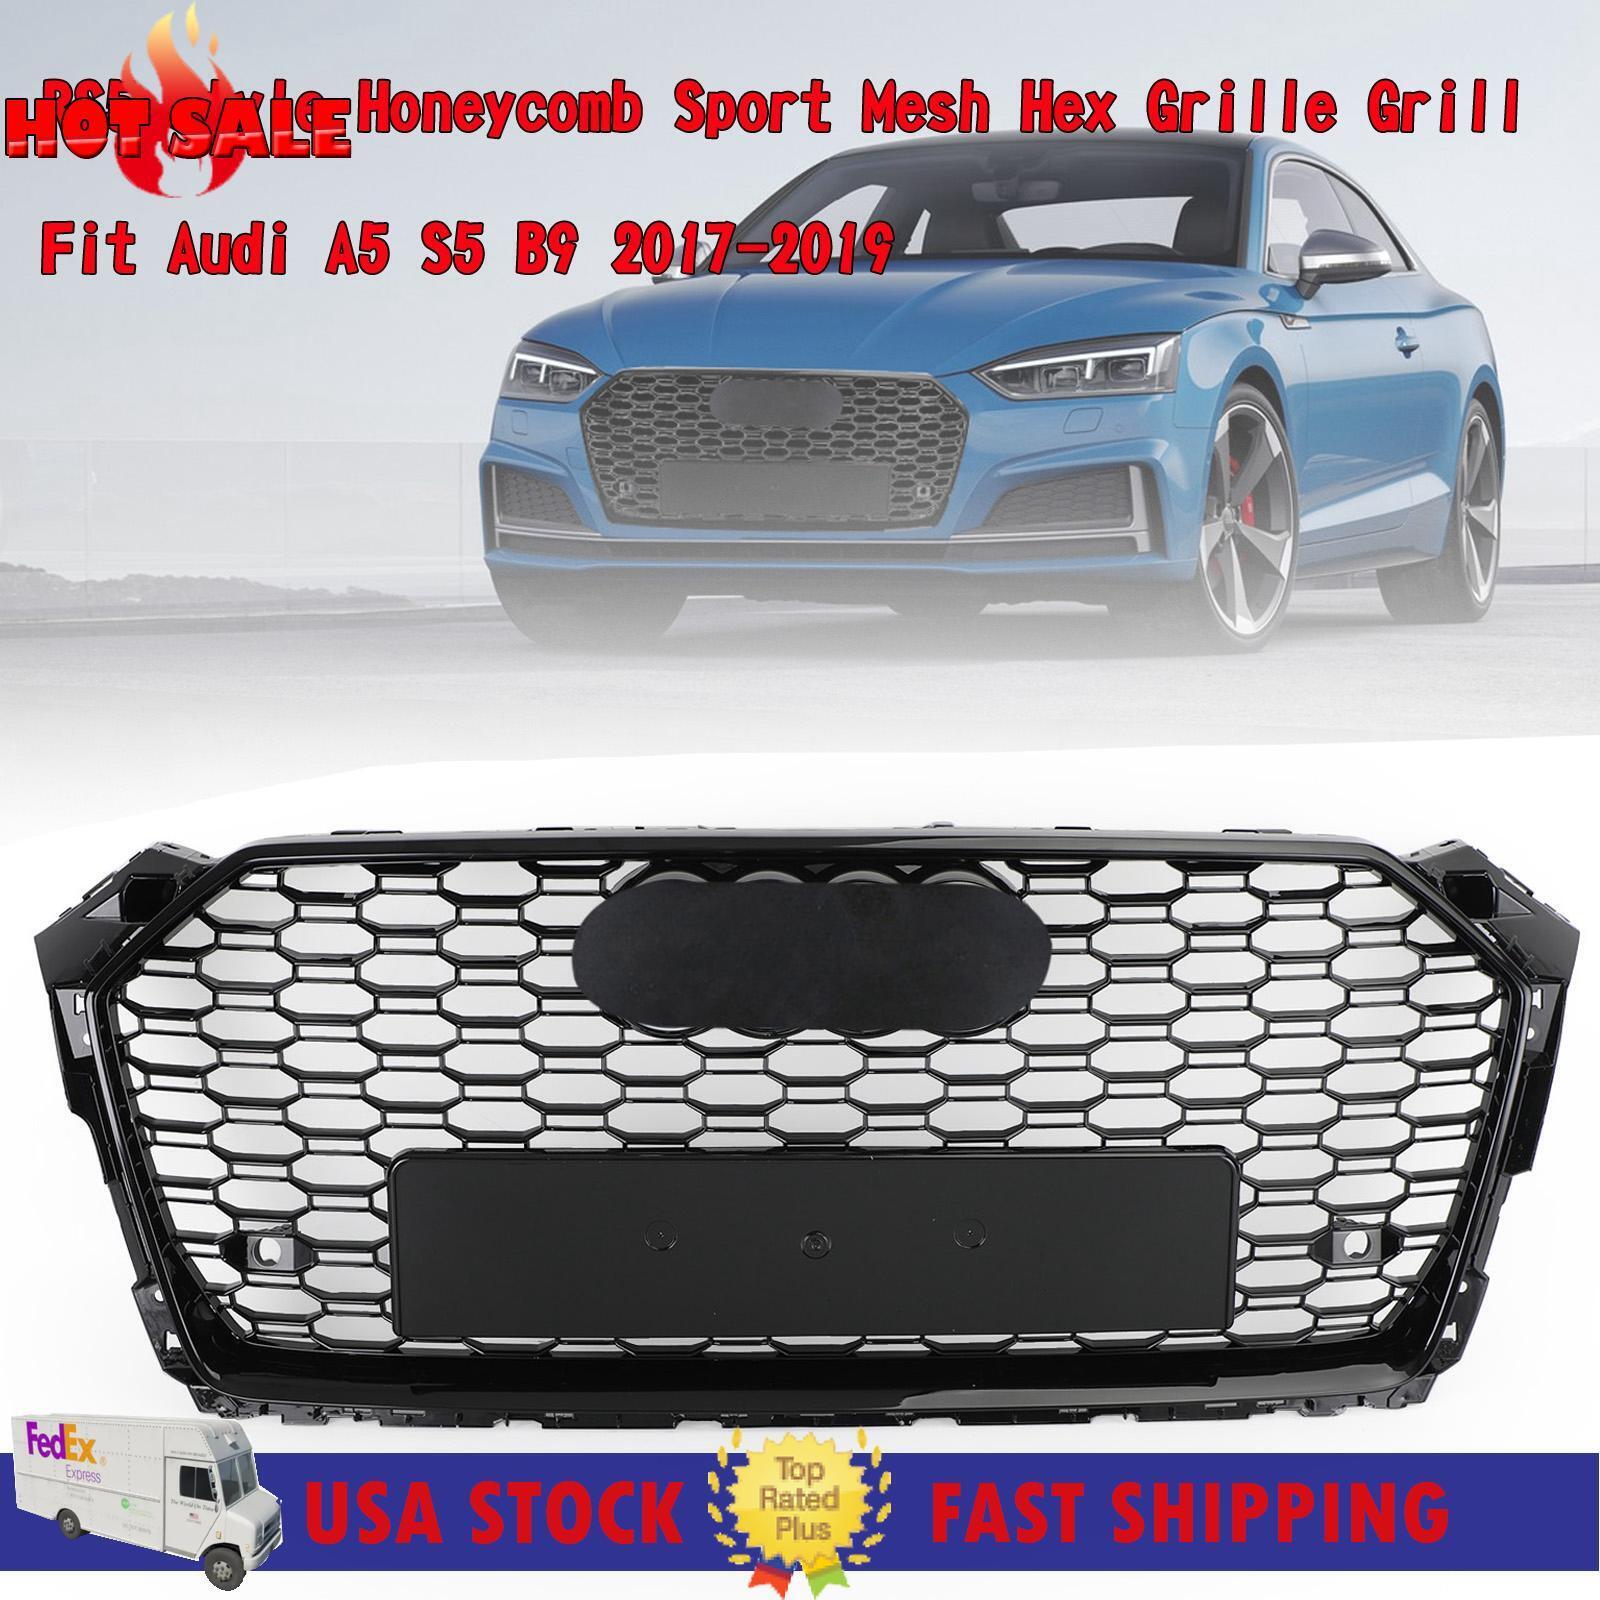 RS5 Style Honeycomb Sport Mesh Hex Grille Grill Fit for Audi A5 S5 B9 2017-2019